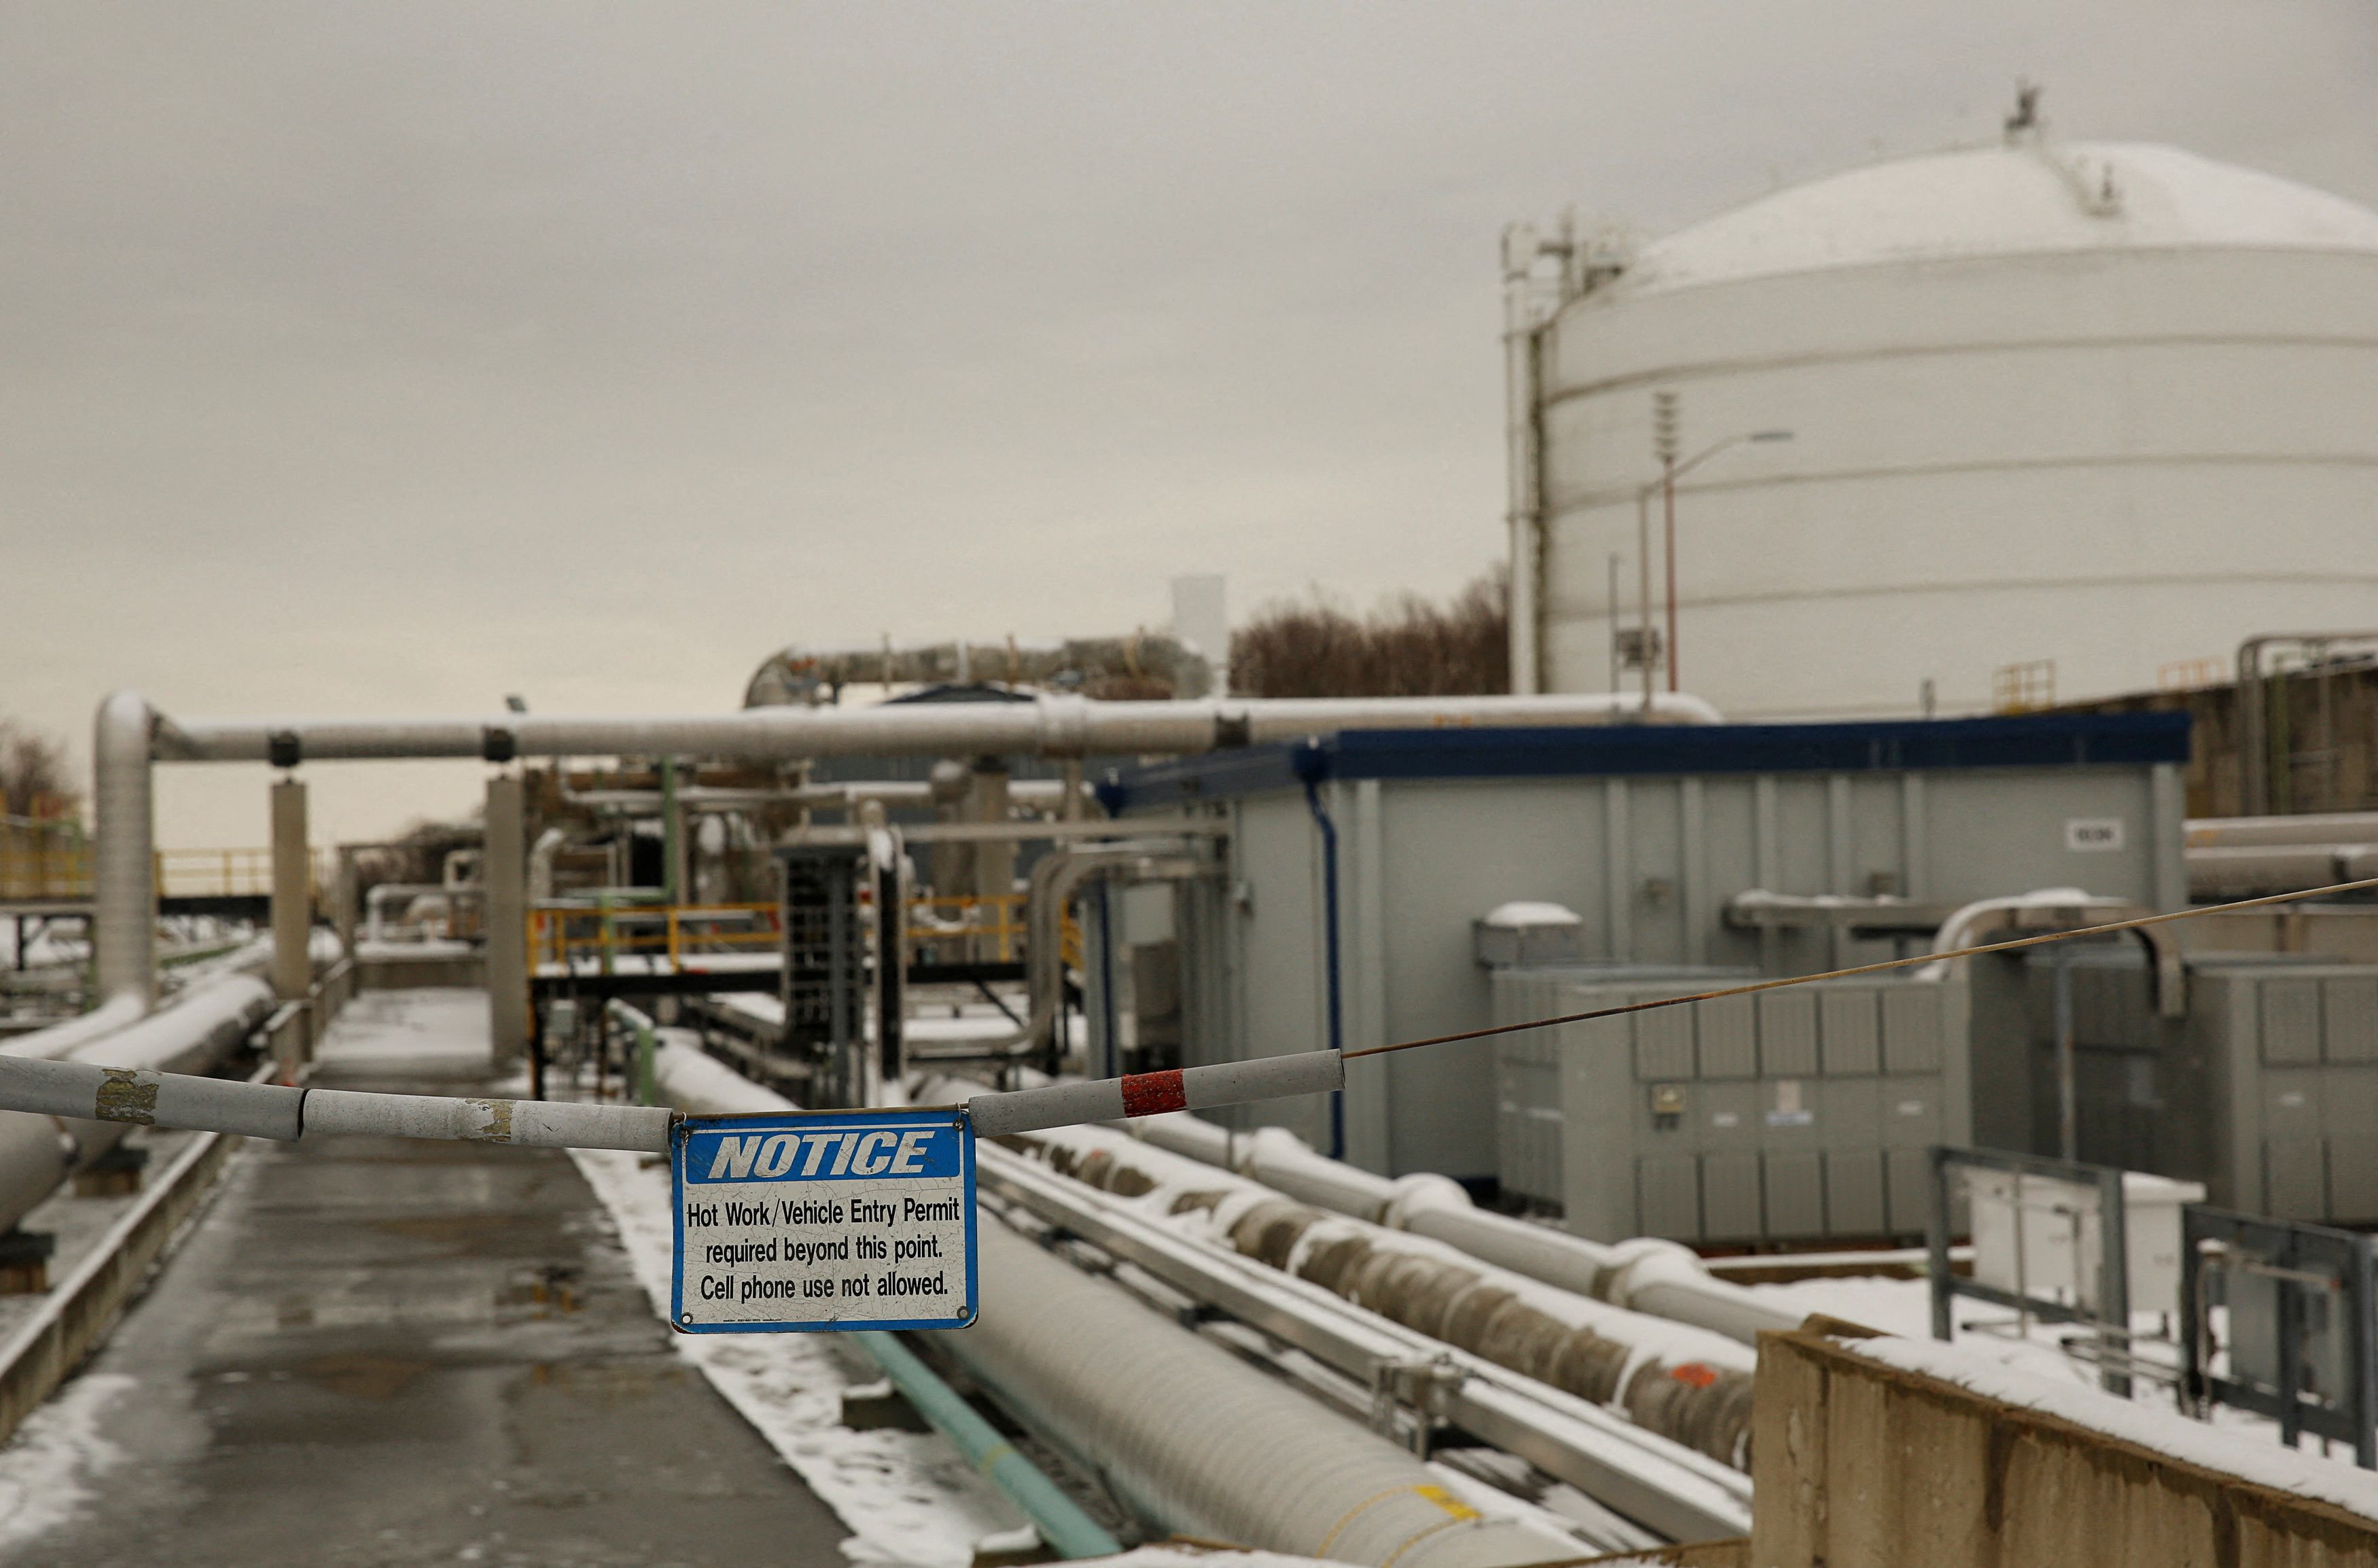 Warning sign is seen with transfer lines at Dominion Cove Point Liquefied Natural Gas terminal in Maryland